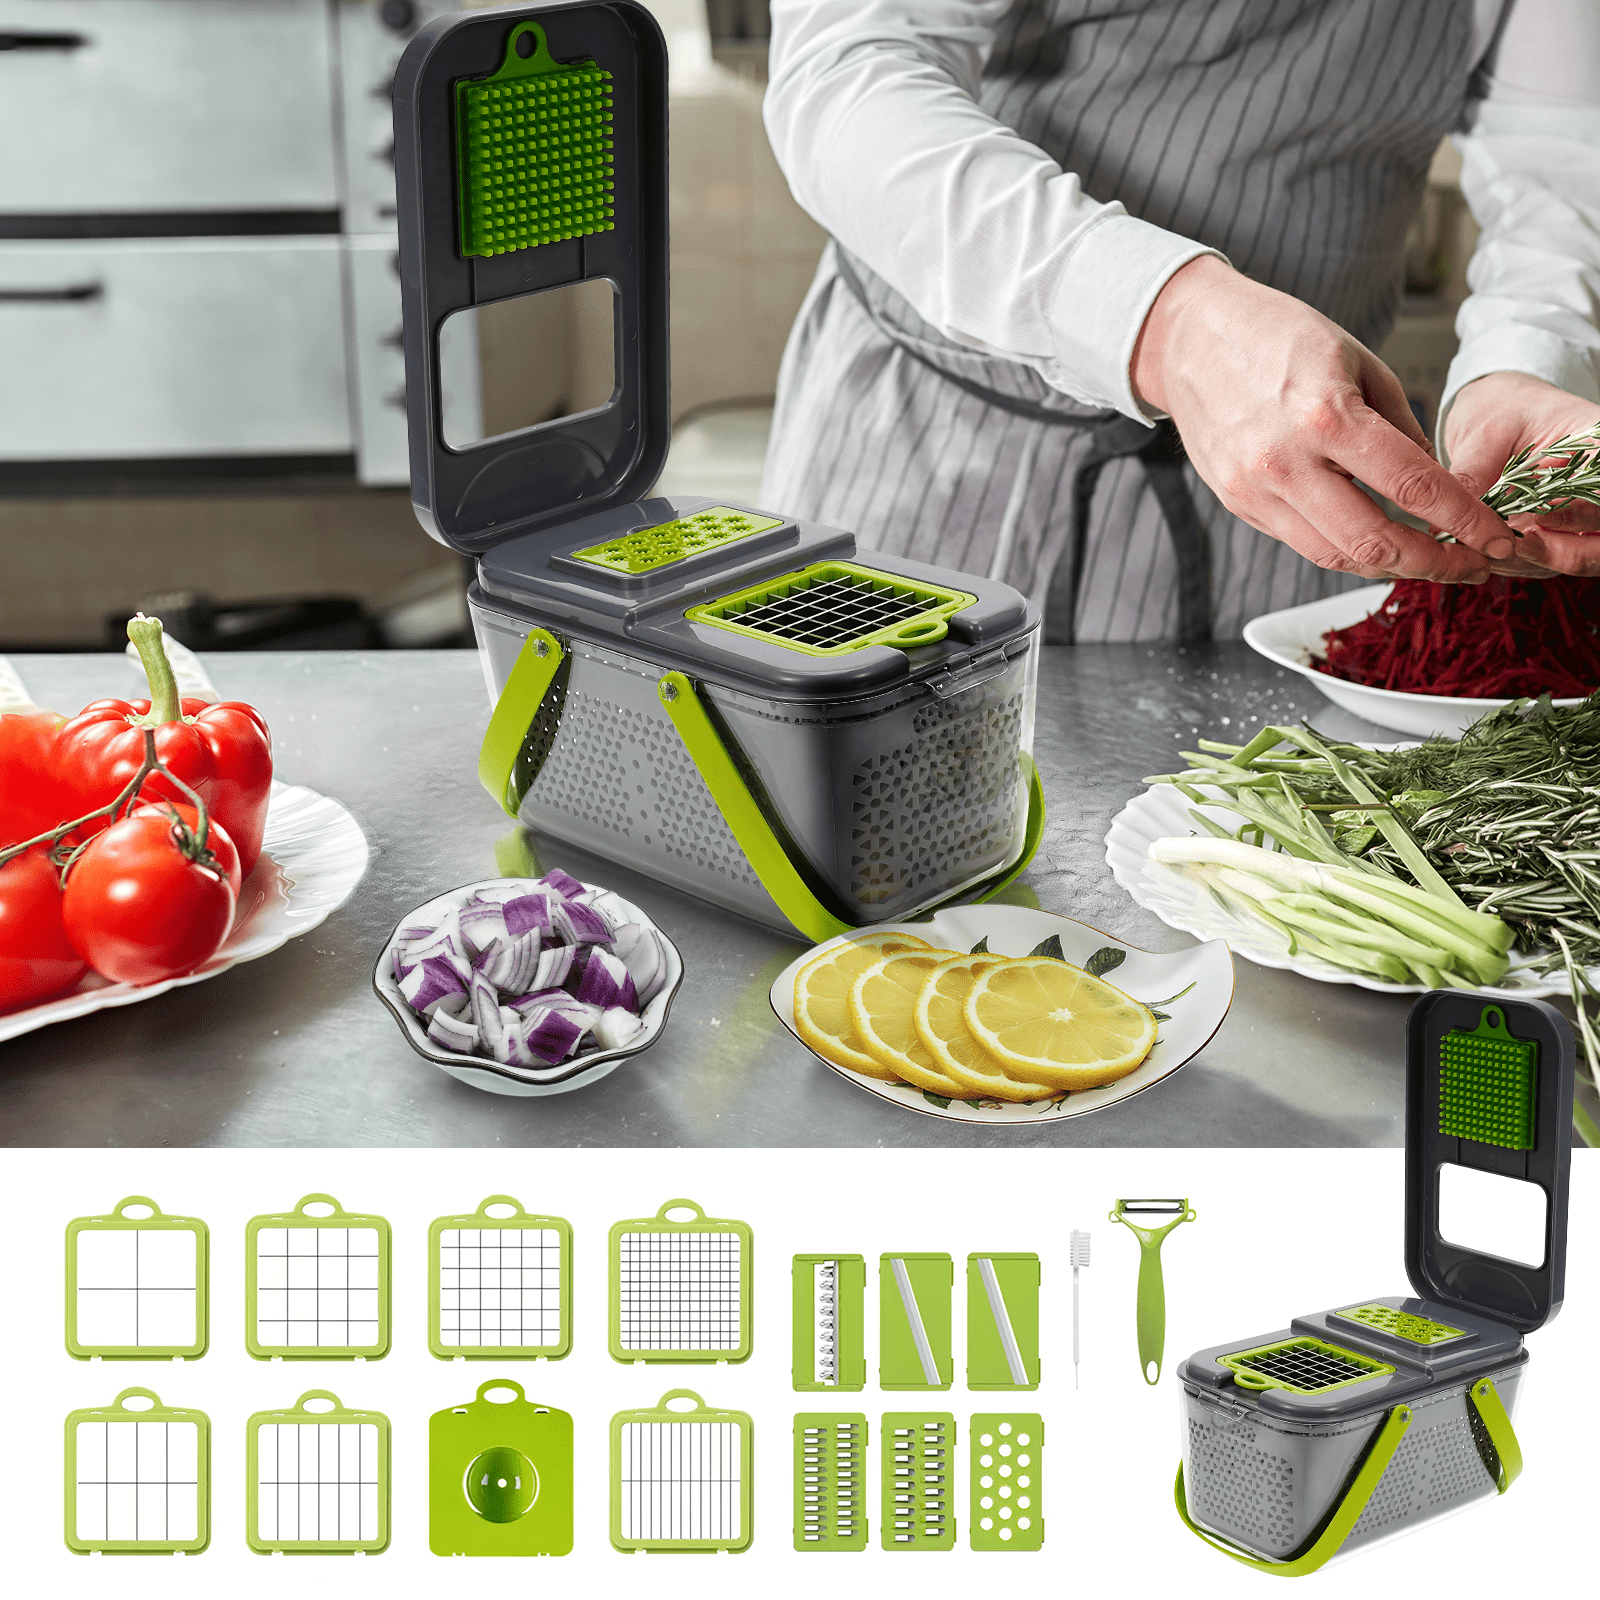 Sunfry Multifunctional Vegetable Chopper with Stainless Steel Blades,  Manual Vegetable Slicer, Gray